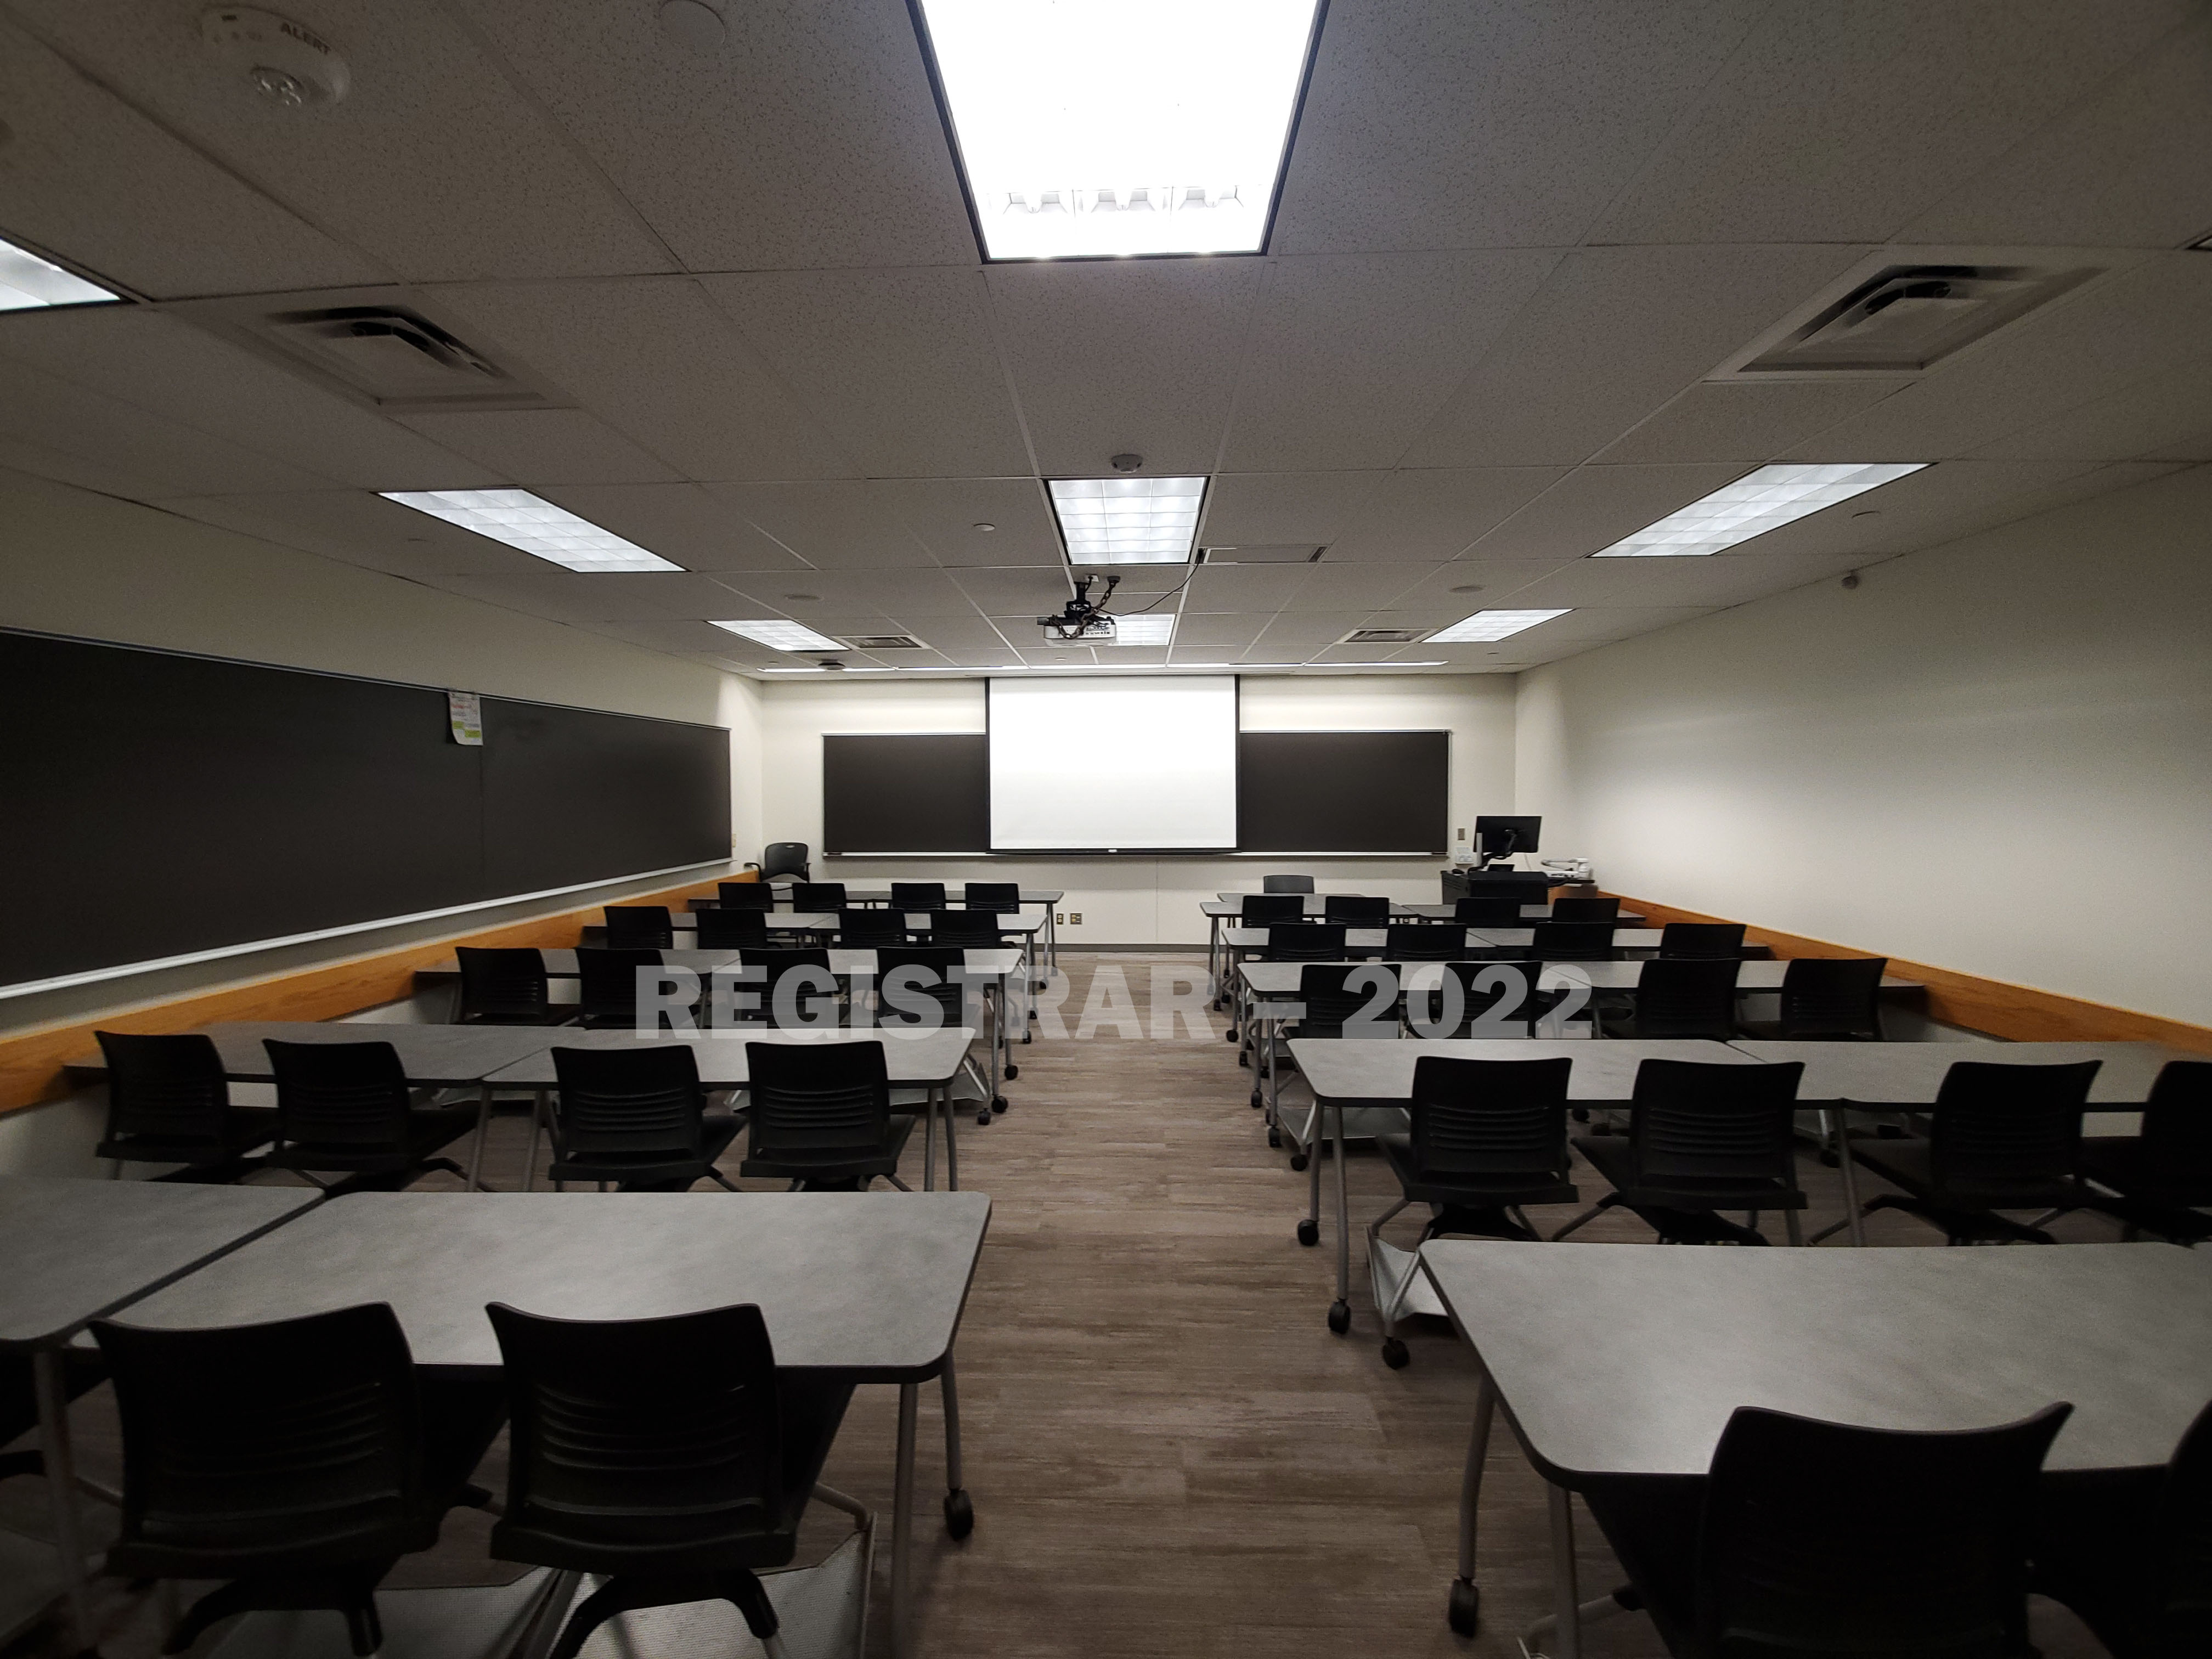 Dreese Lab room 266 ultra wide angle view from the back of the room with projector screen down